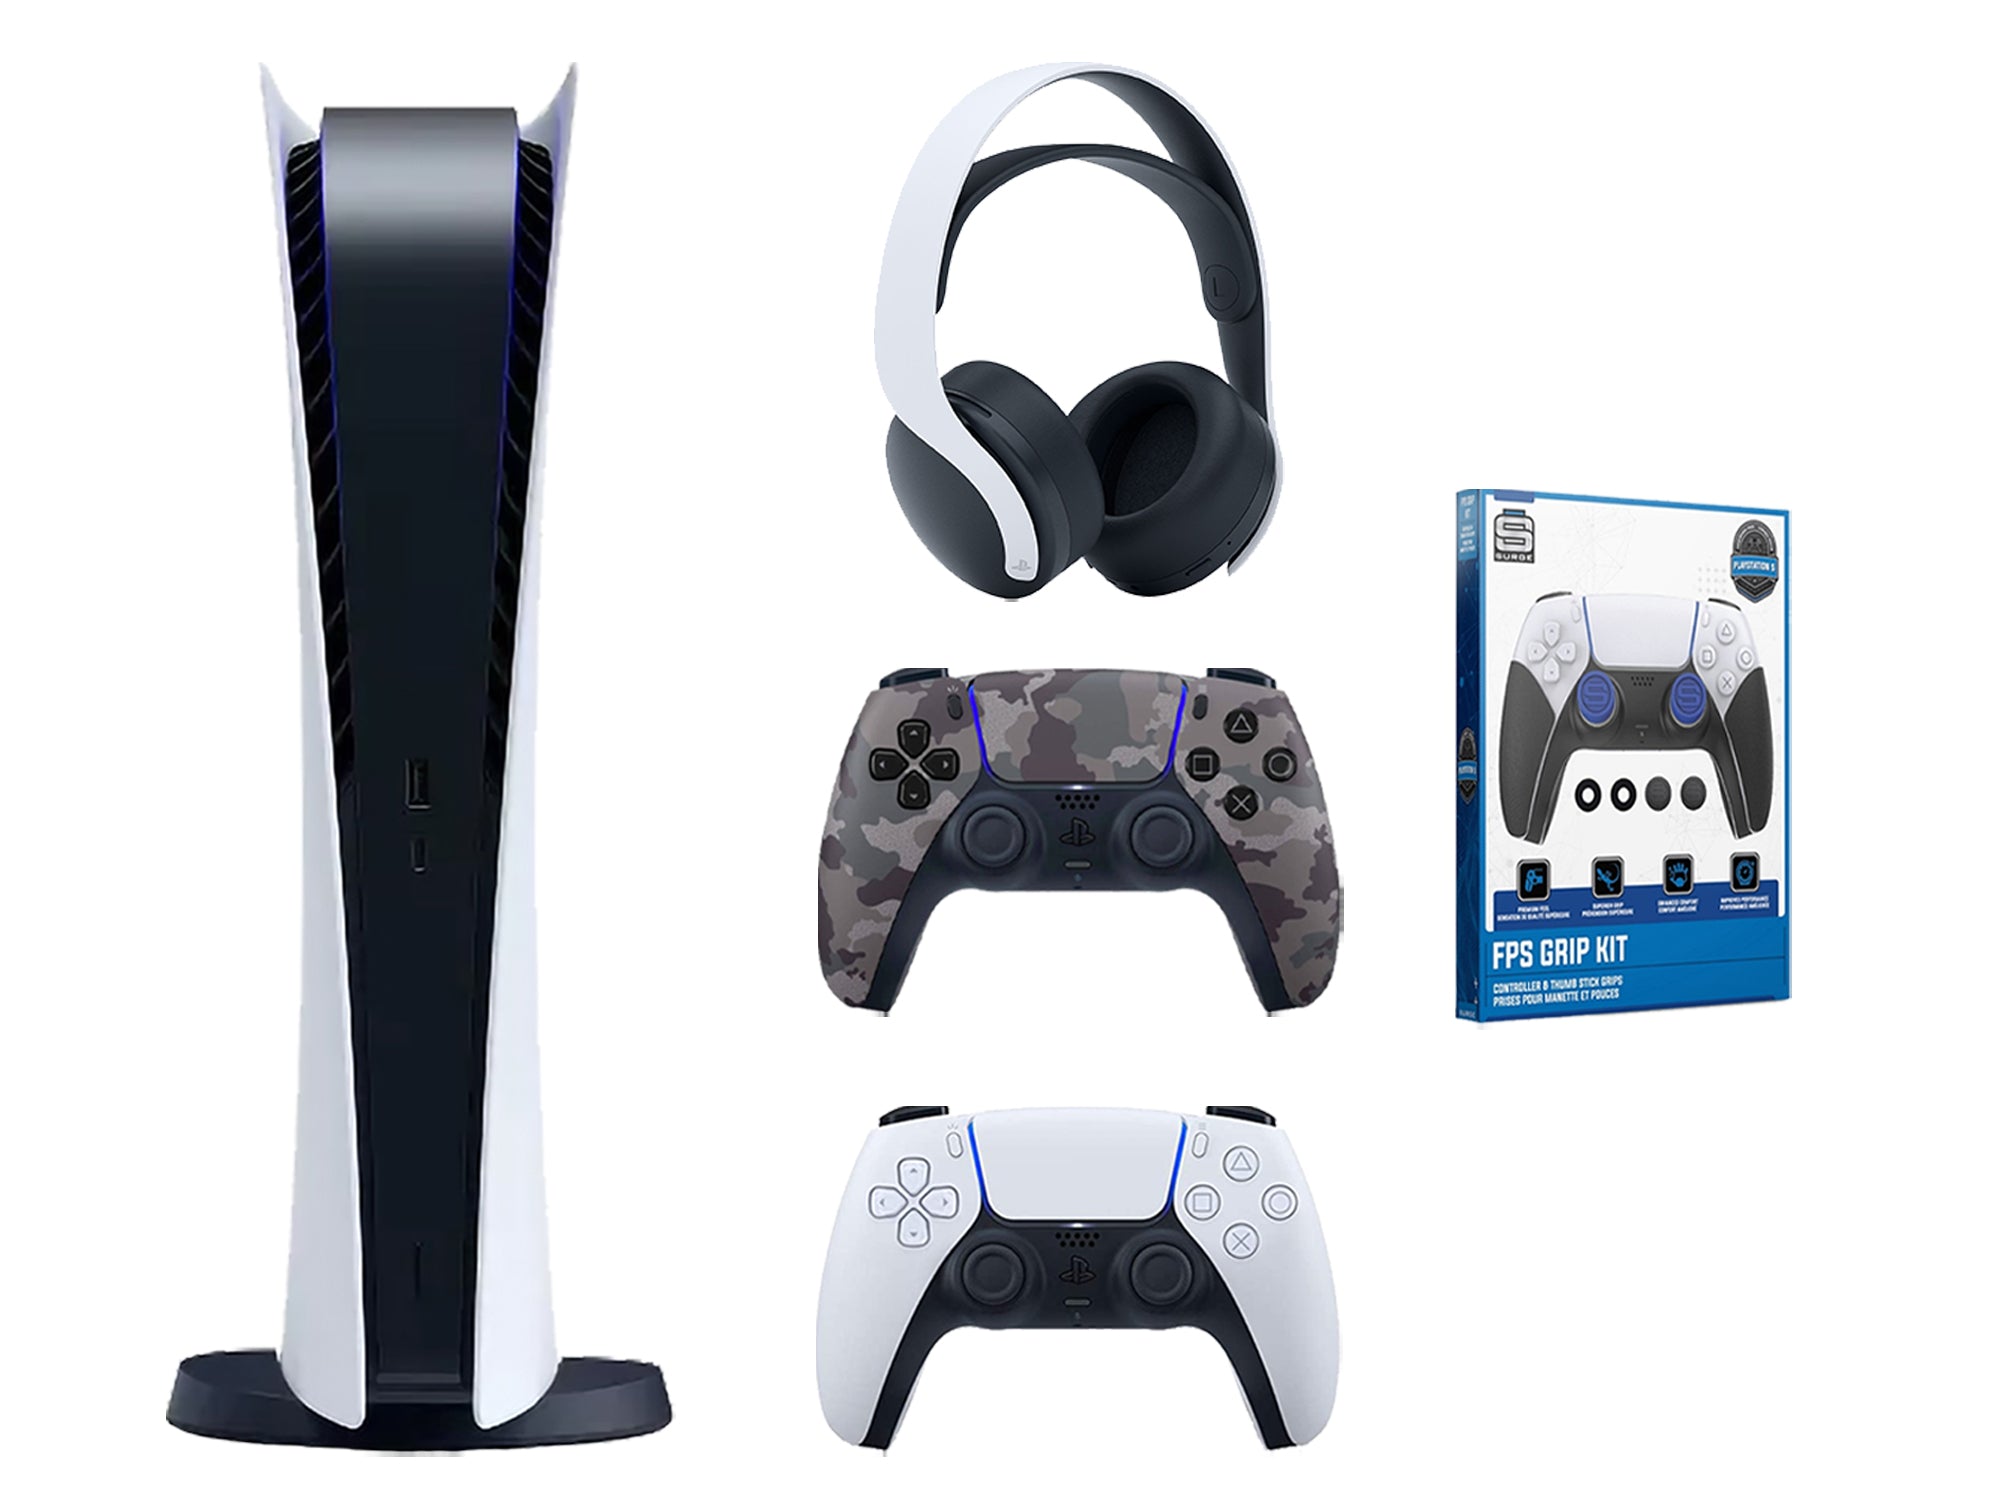 Sony Playstation 5 Digital Edition Bundle with Extra Gray Camo Controller, White PULSE 3D Wireless Headset and FPS Grip Kit - Pro-Distributing